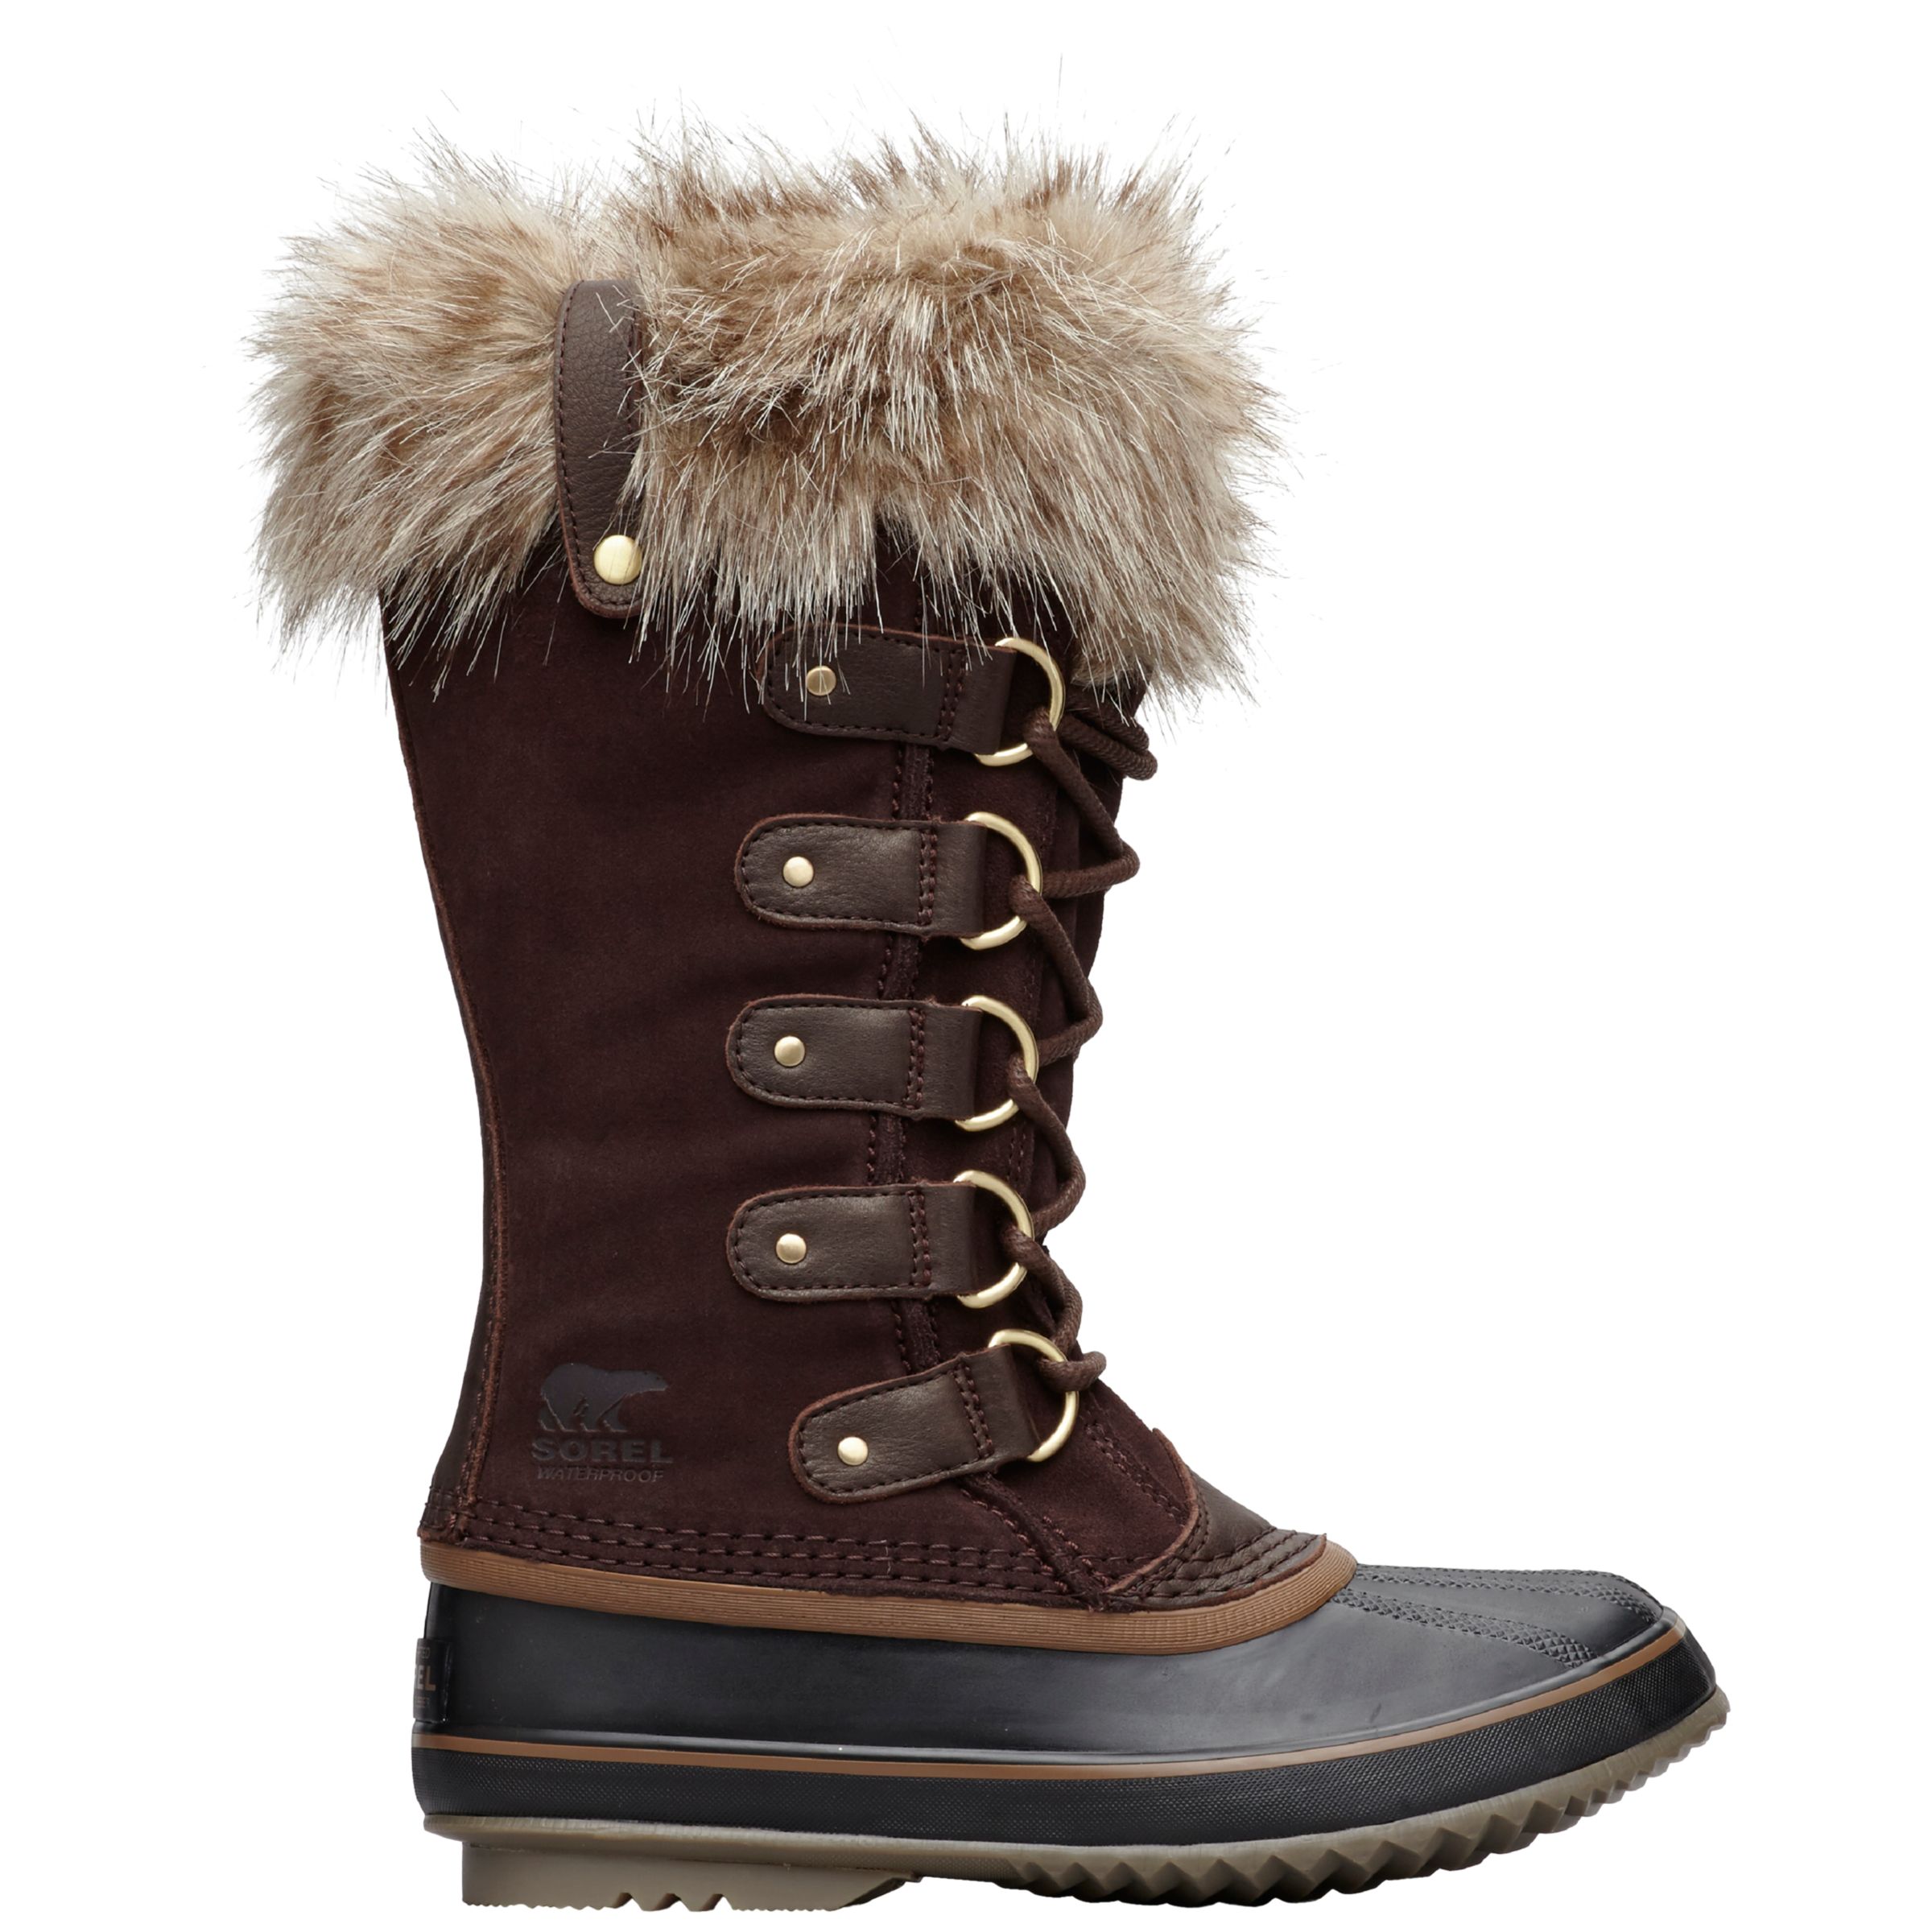 Sorel Joan Of Arctic Long Lace Up Snow Boots, Brown Suede